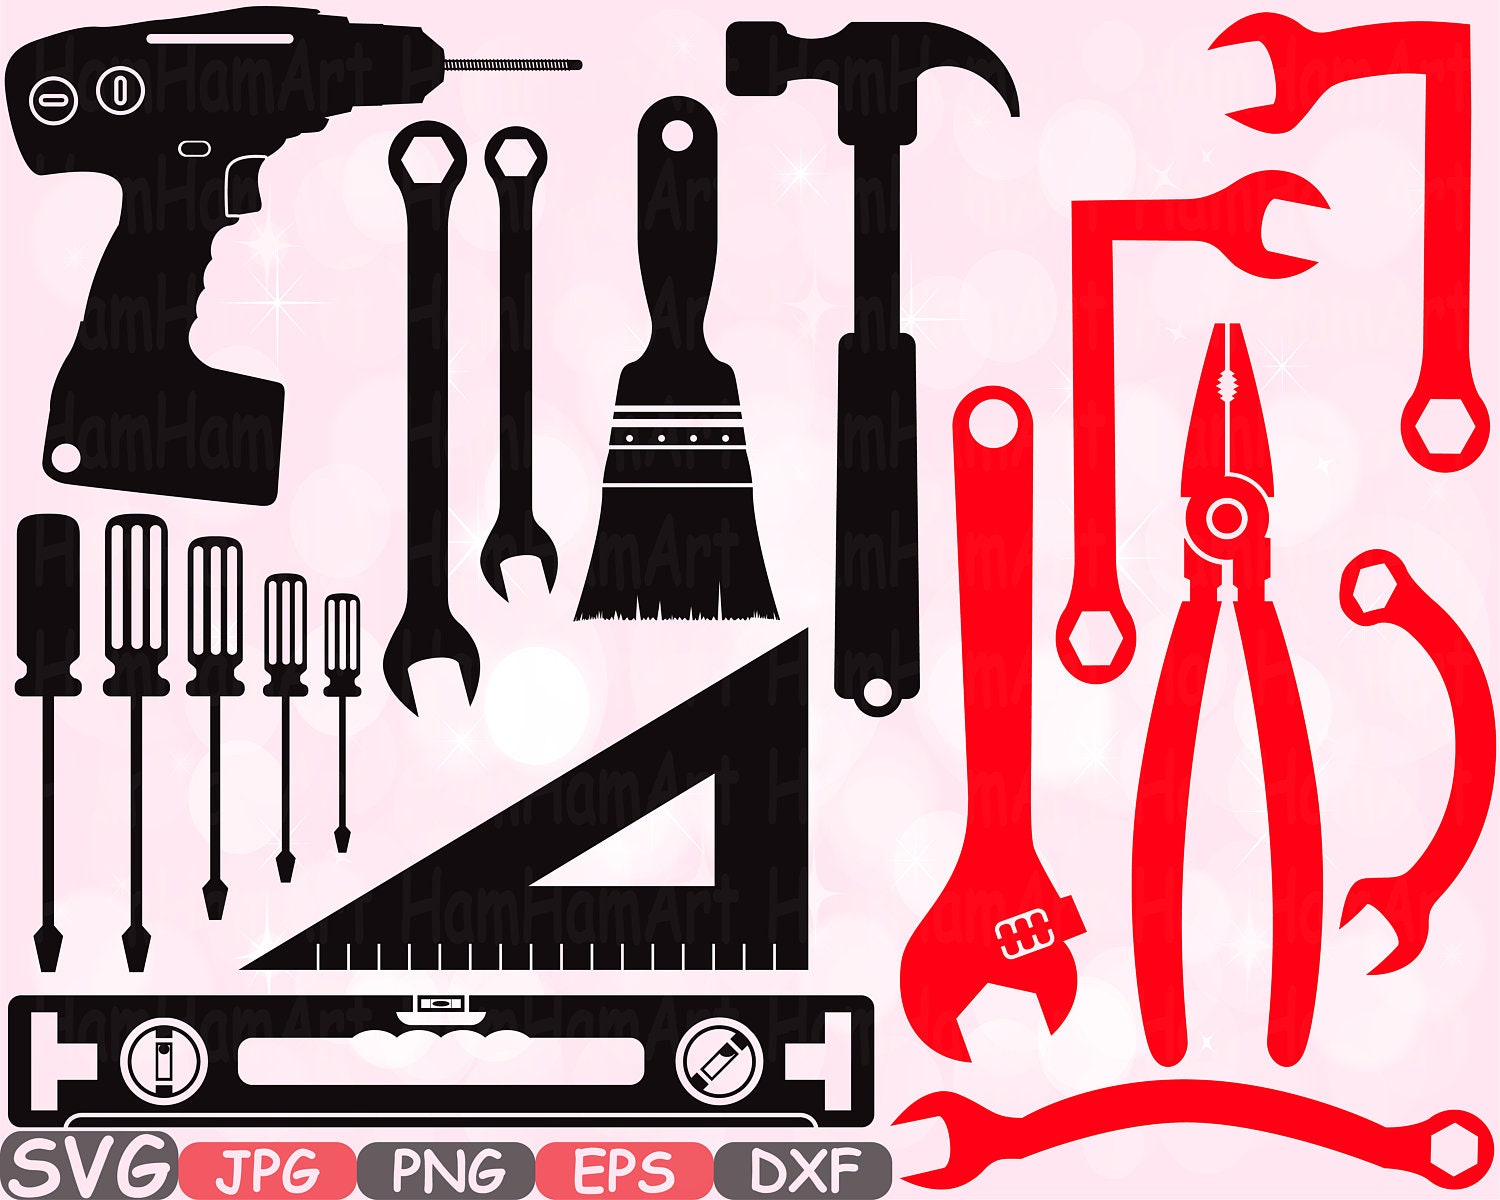 Download Mechanic Tools Silhouette SVG Cutting Files clipart Handyman